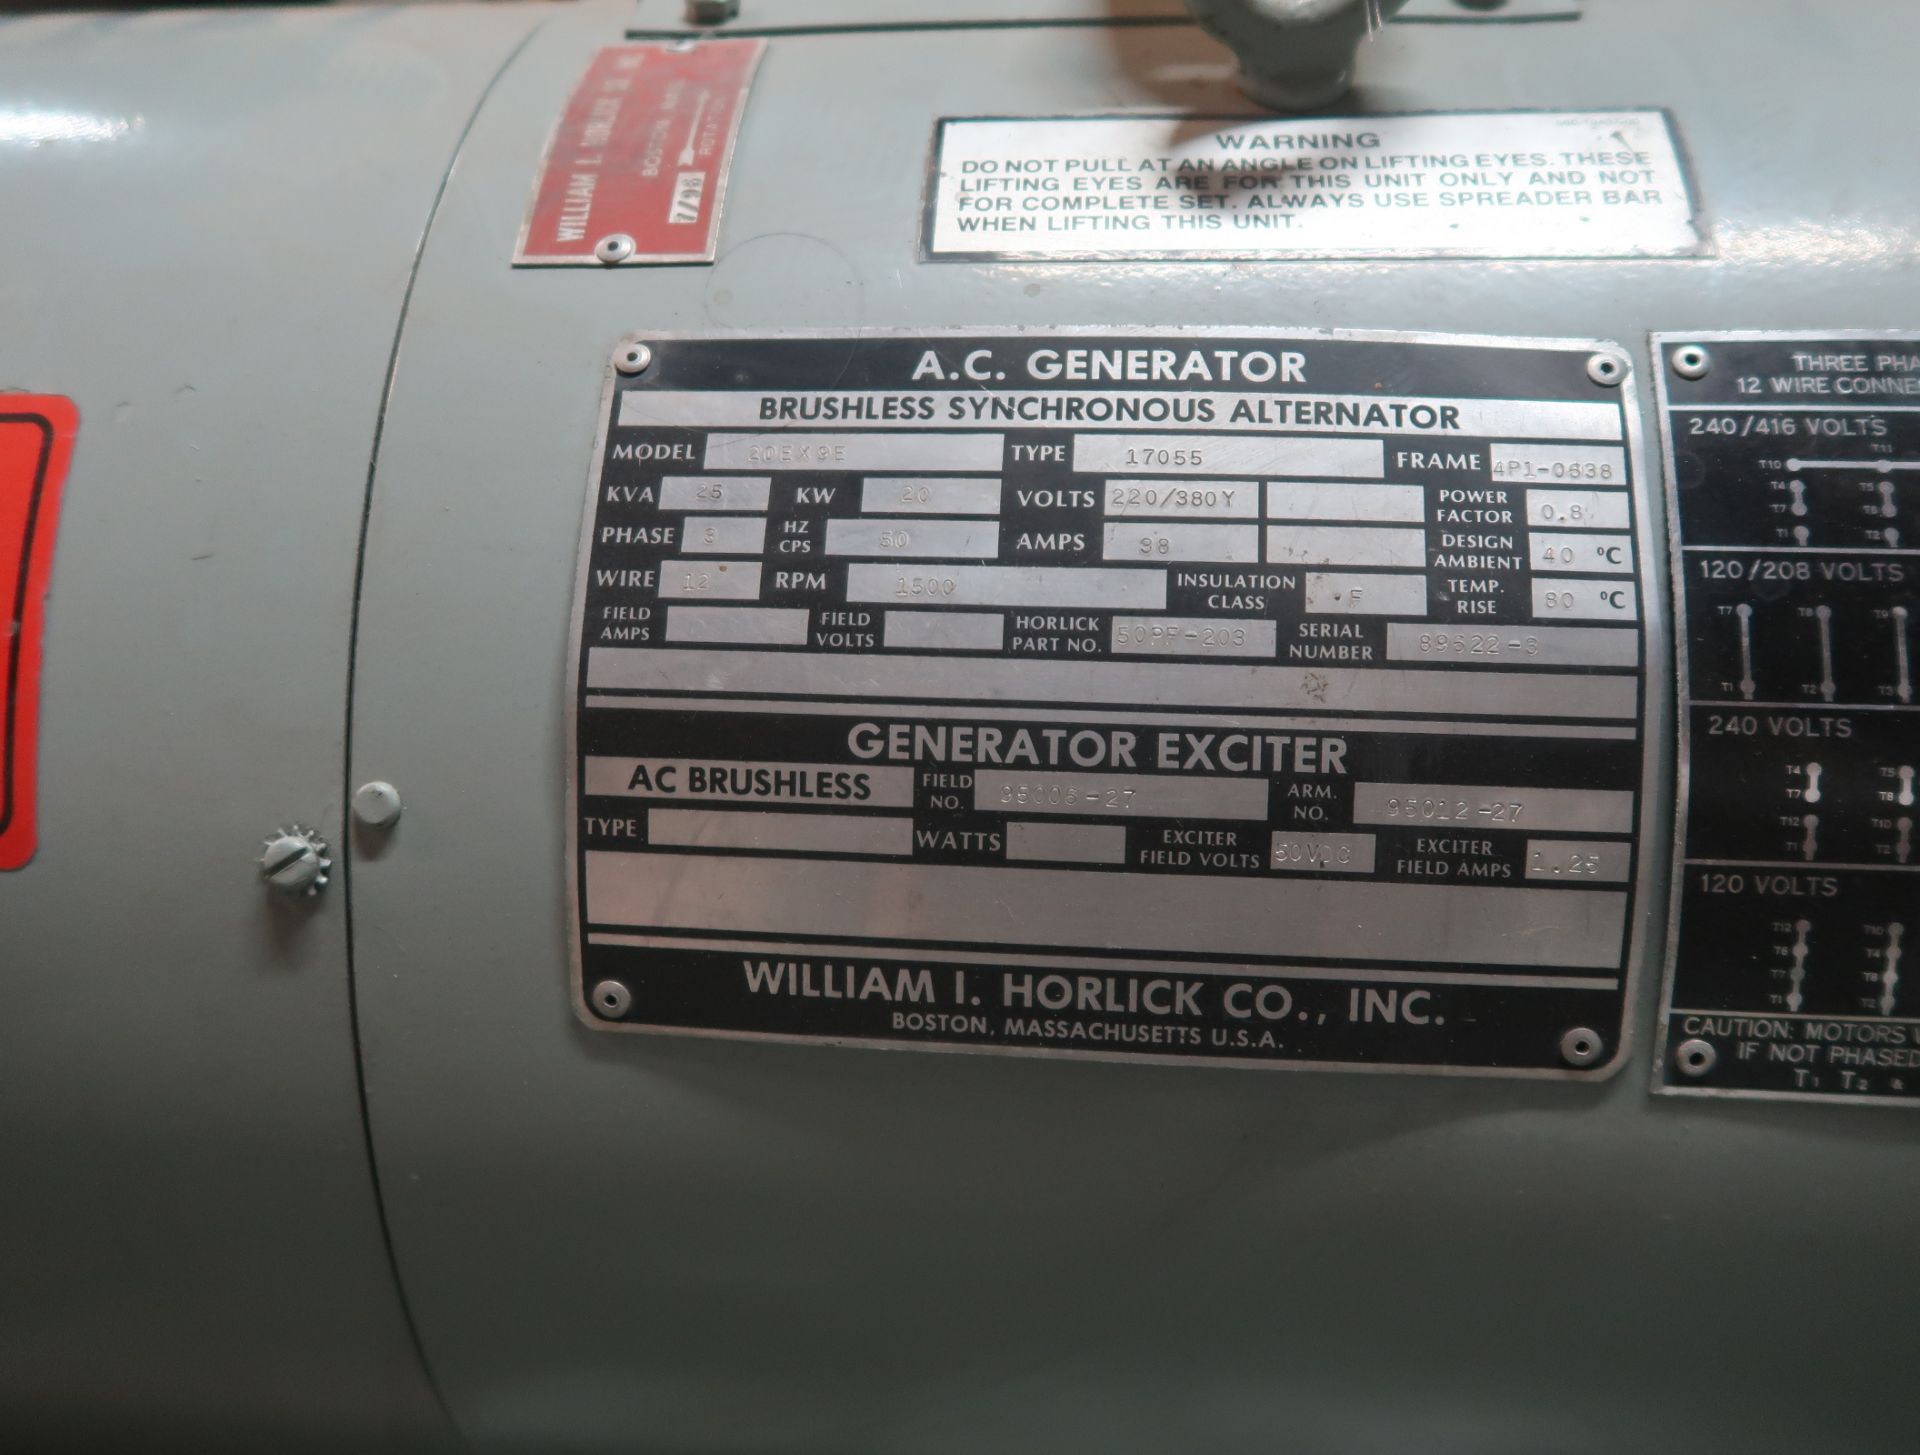 A.C. GENERATOR BRUSHLESS SYNCHRONOUS ALTERNATOR MDL. 20EX9E W/CONTROL PANEL - Image 5 of 5